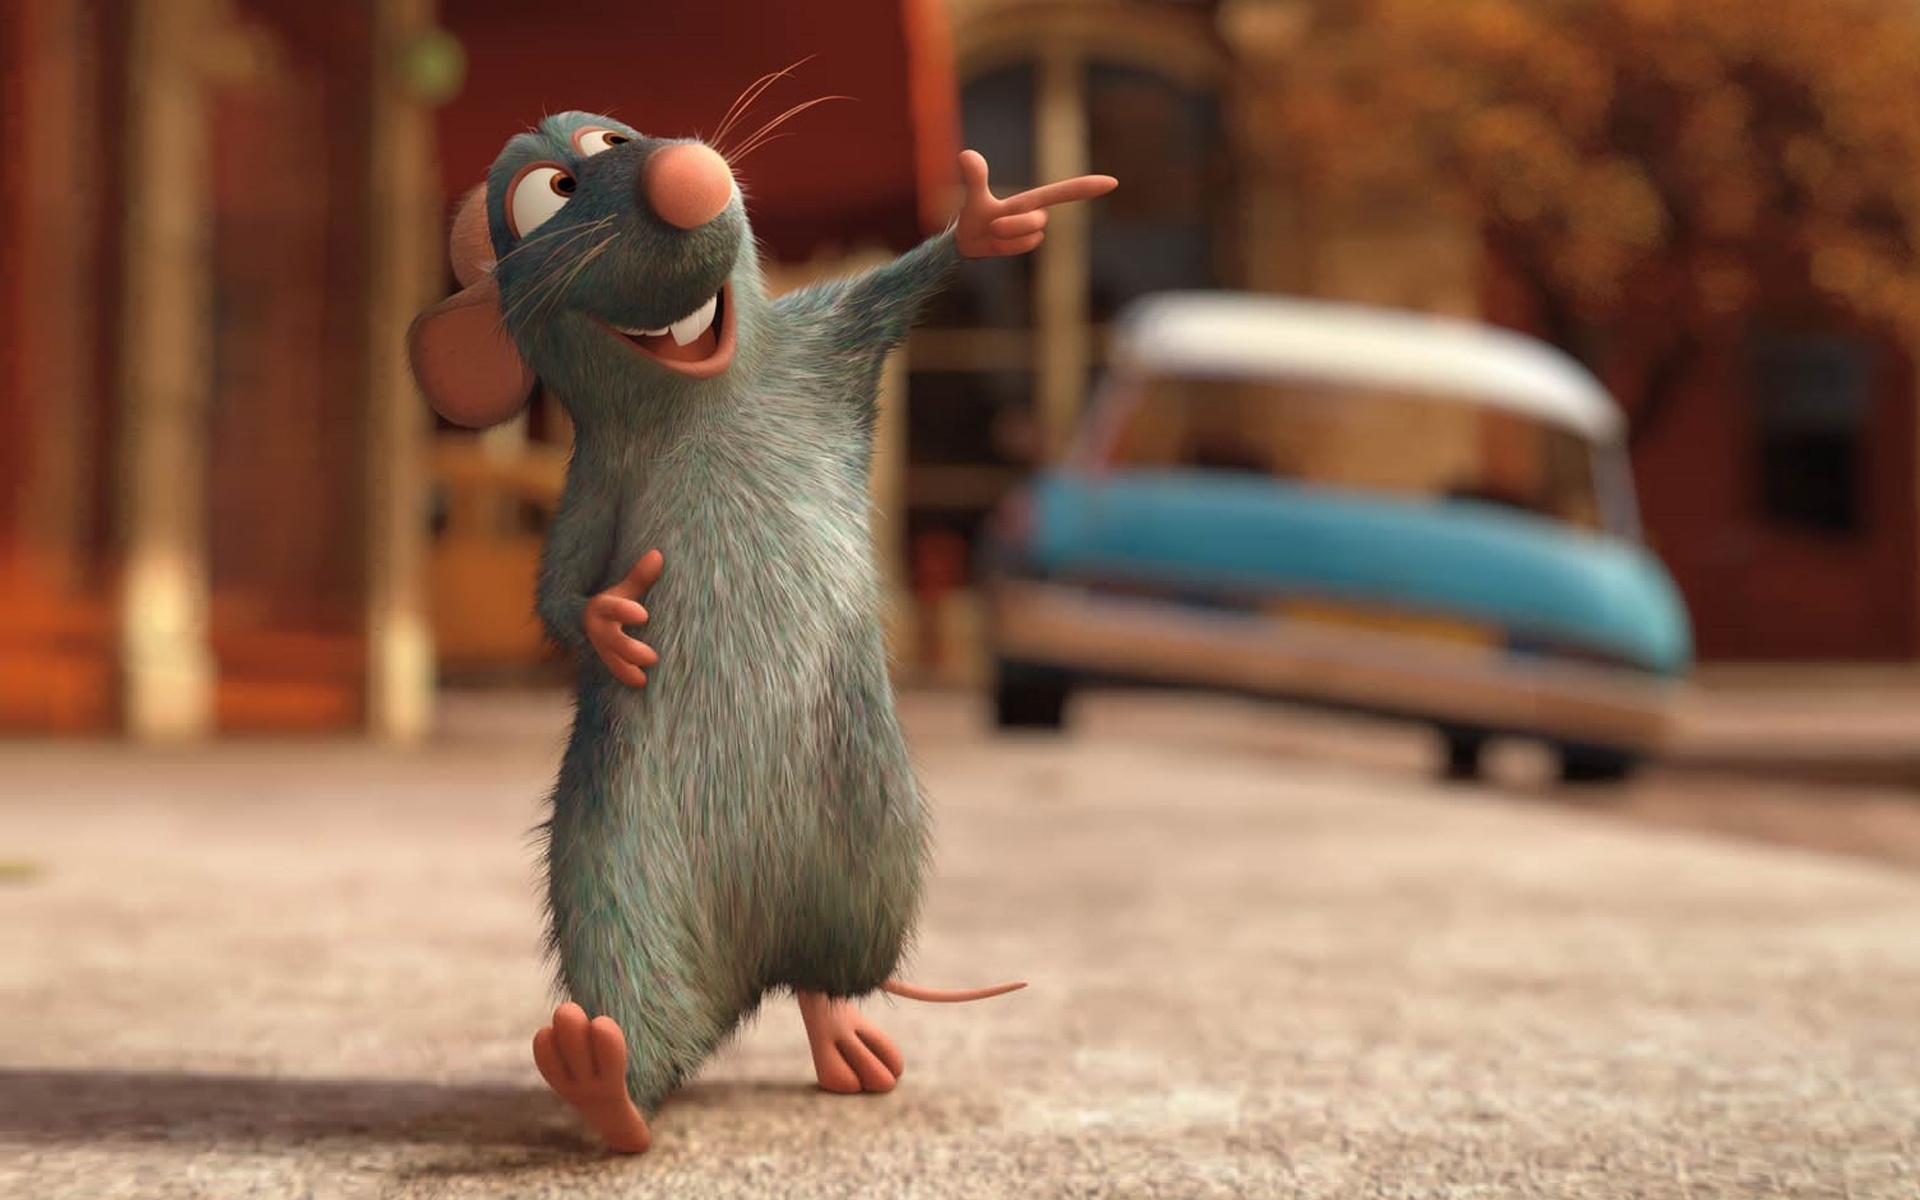 40440 download wallpaper cartoon, ratatouille screensavers and pictures for free